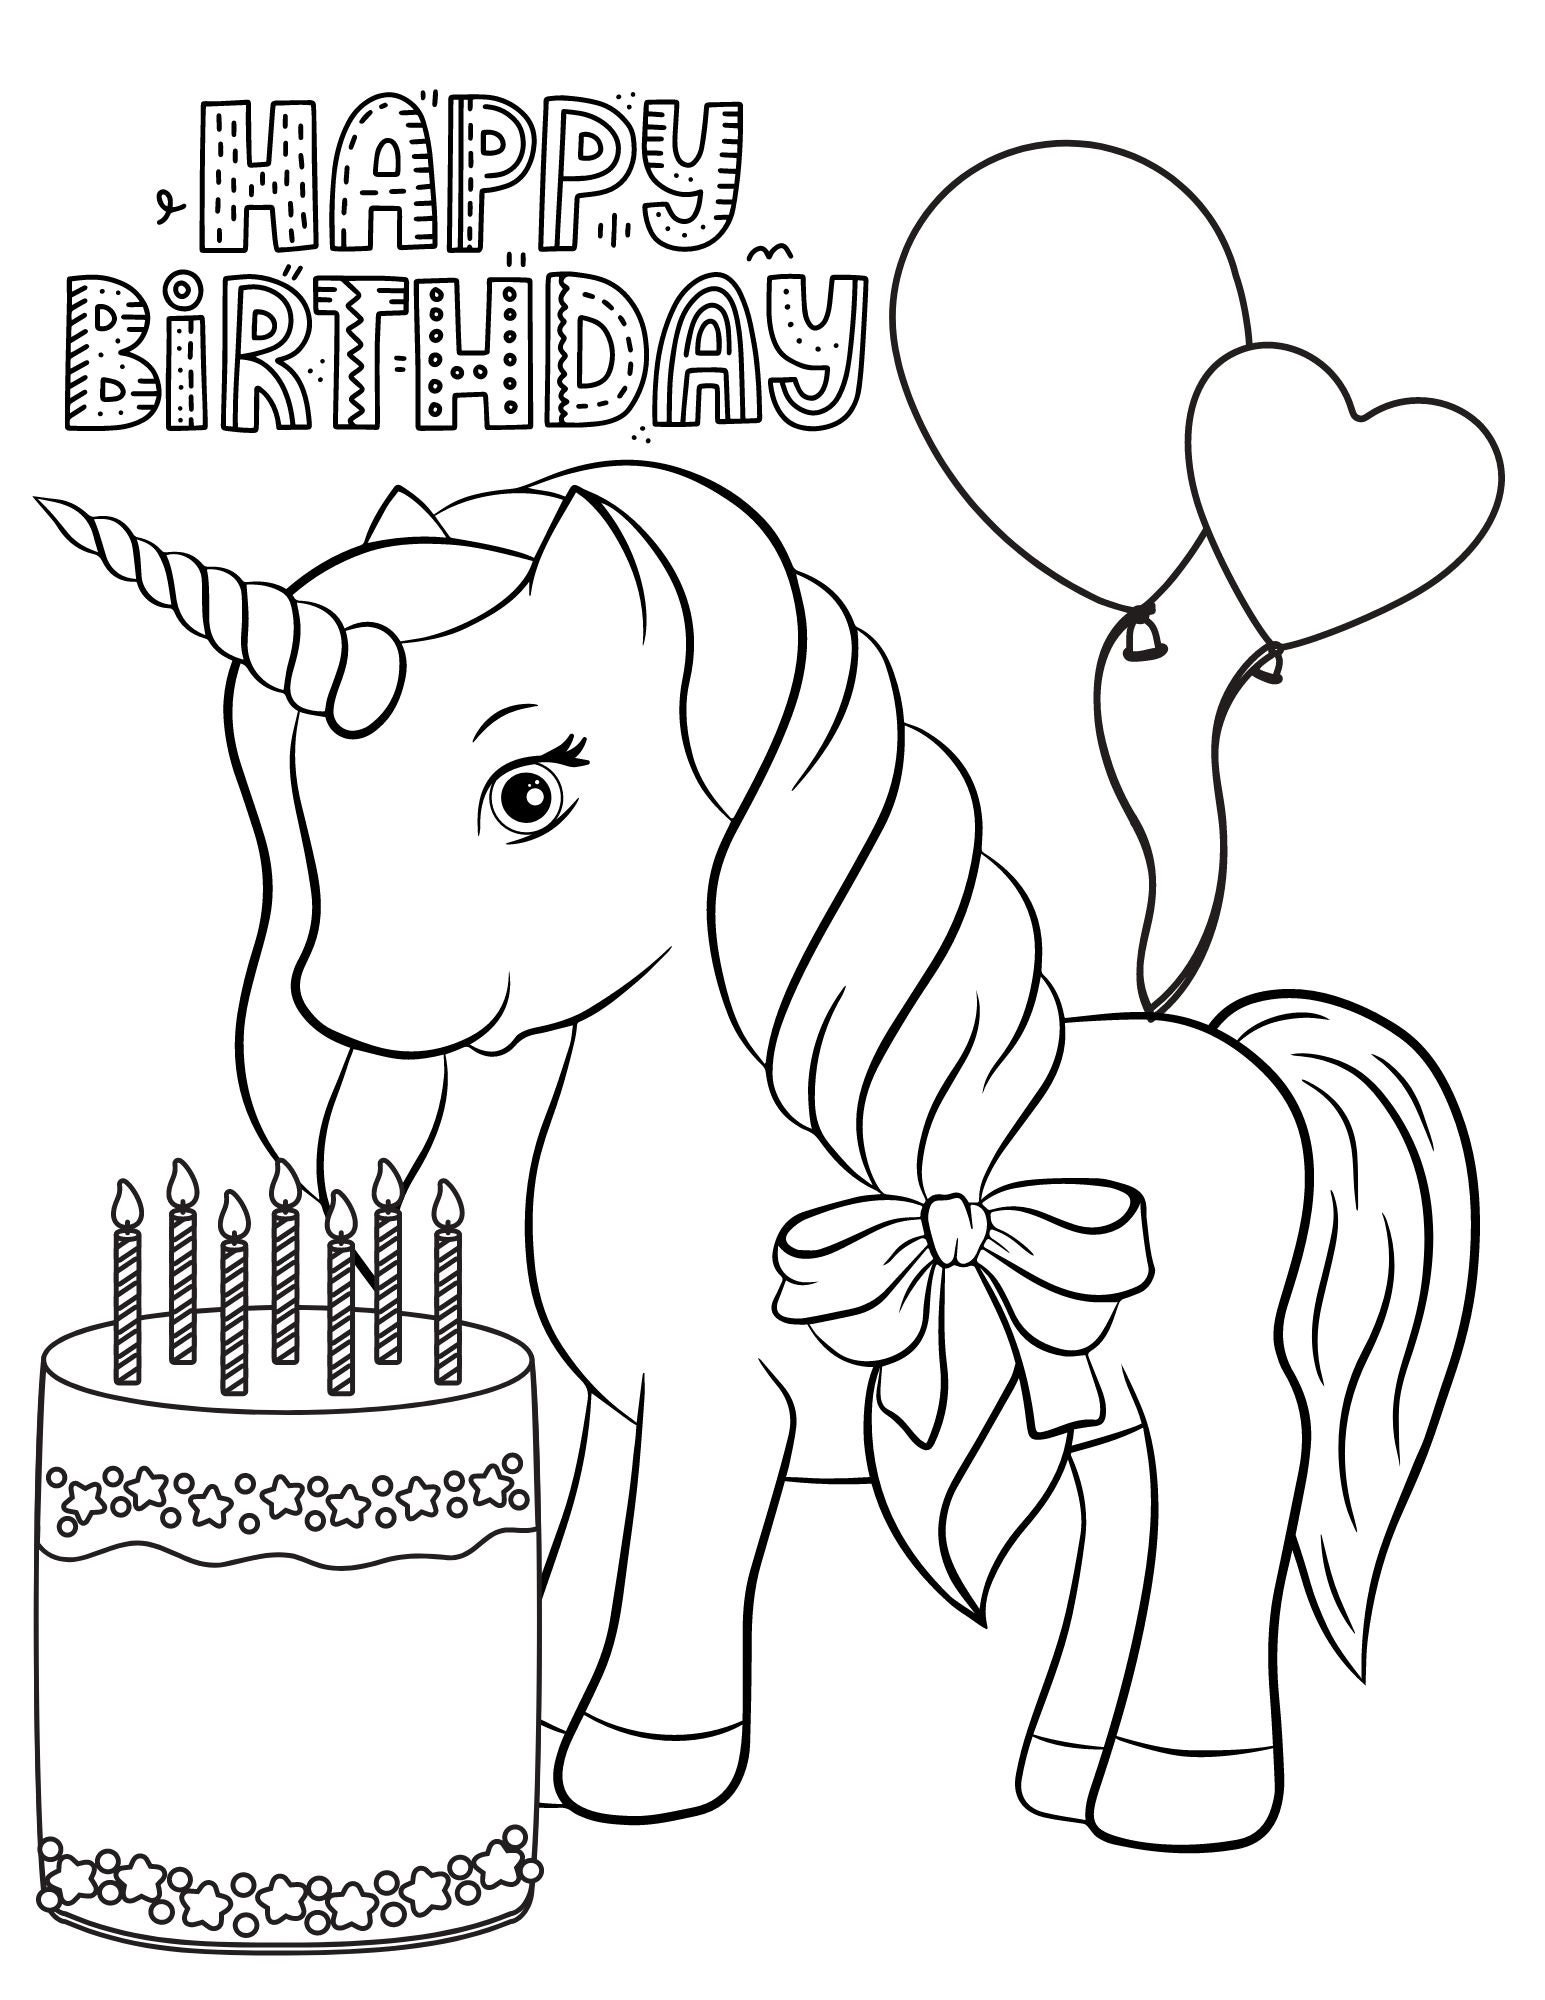 Happy birthday coloring pages happy birthday printables happy birthday coloring sheets happy birthday coloring pdf happy bday coloring